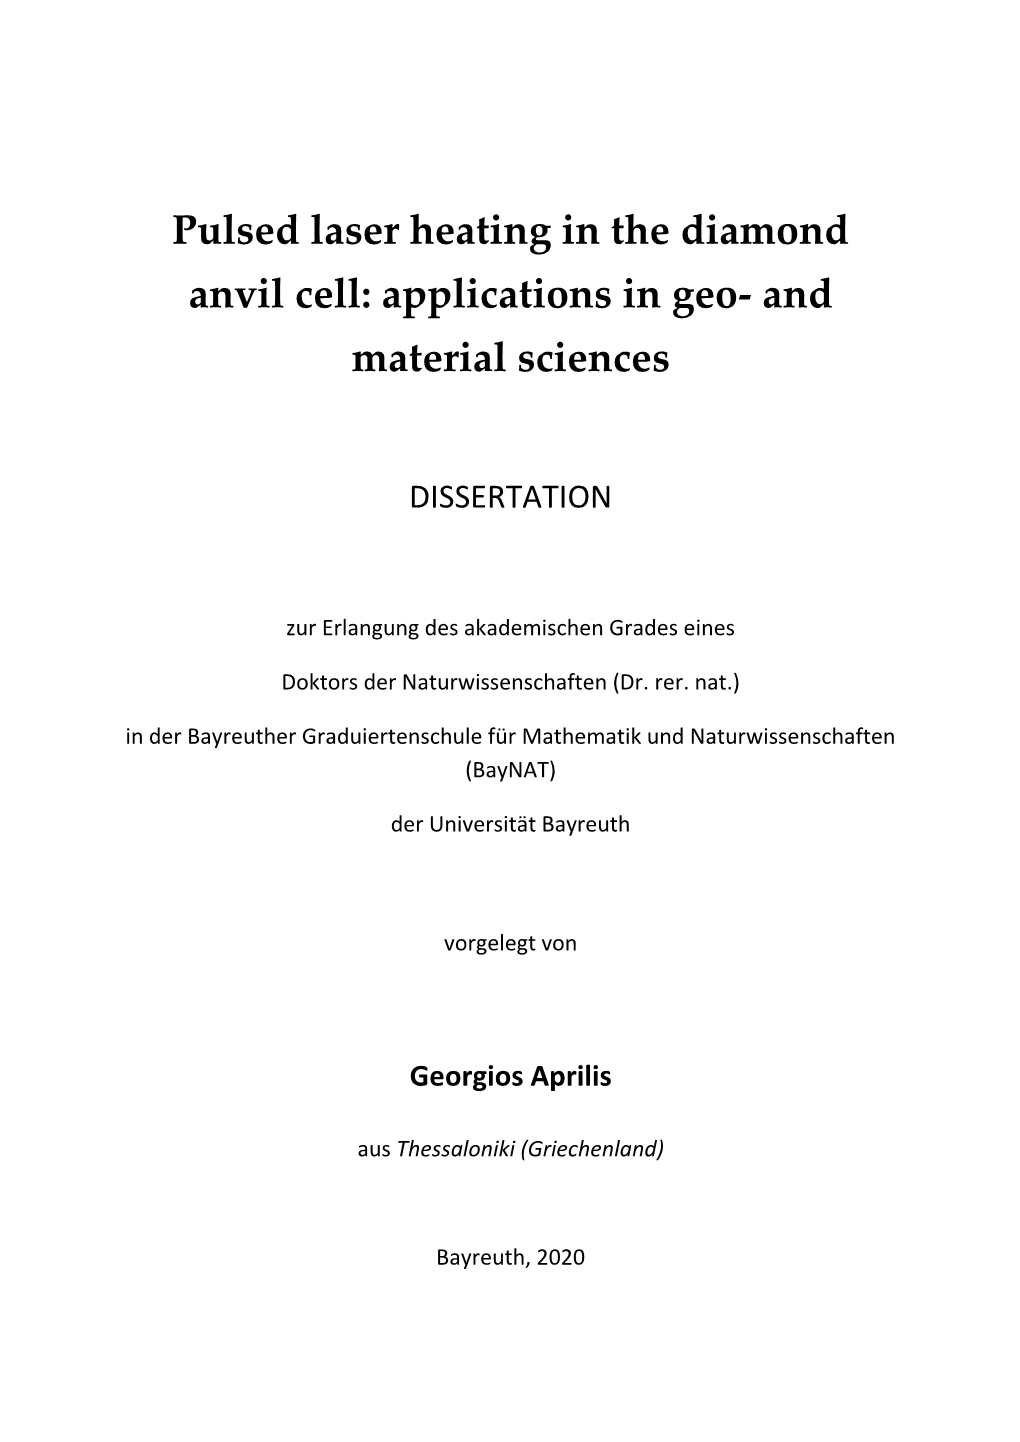 Pulsed Laser Heating in the Diamond Anvil Cell: Applications in Geo- and Material Sciences